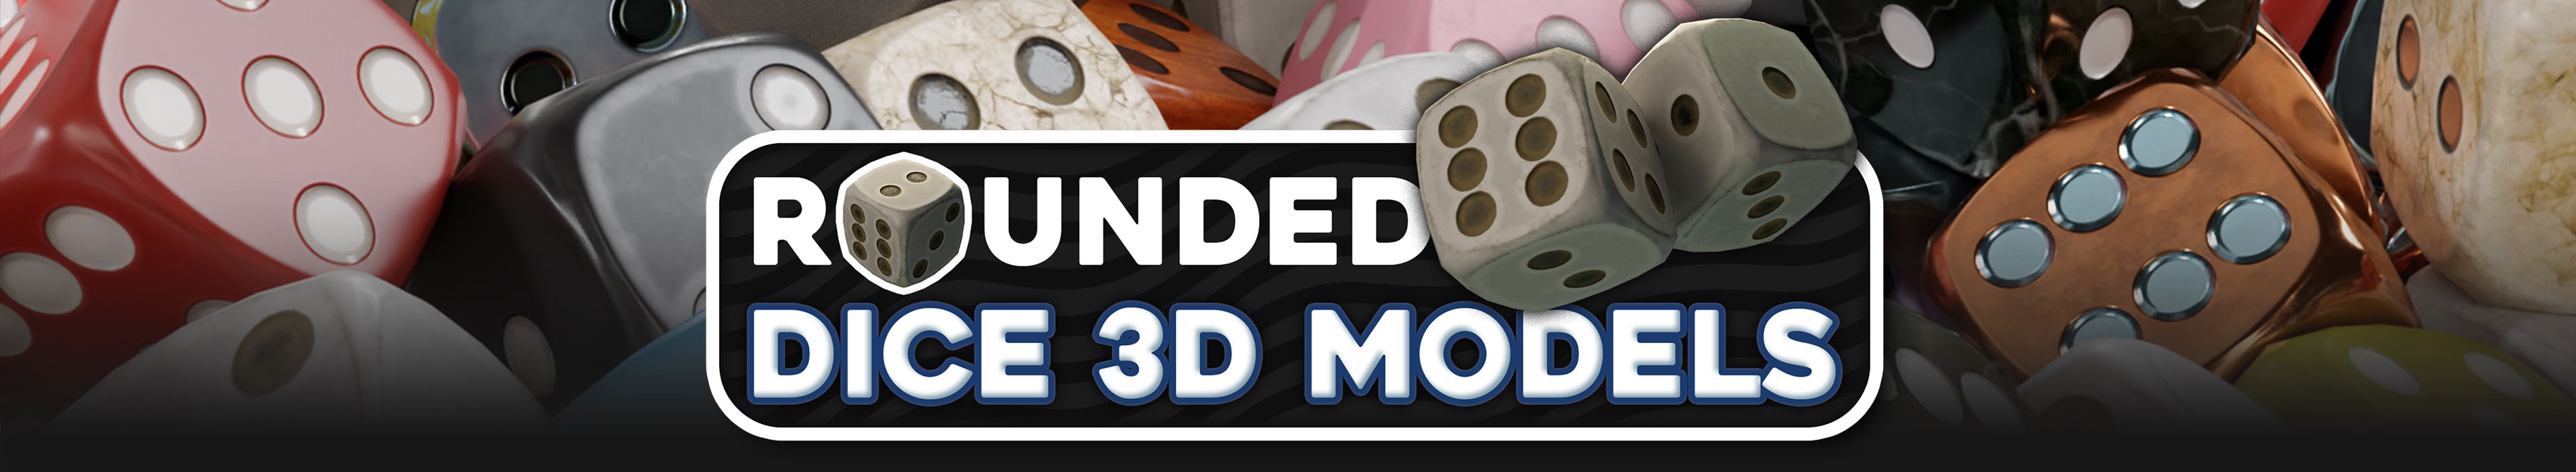 Rounded Dice 3D Models